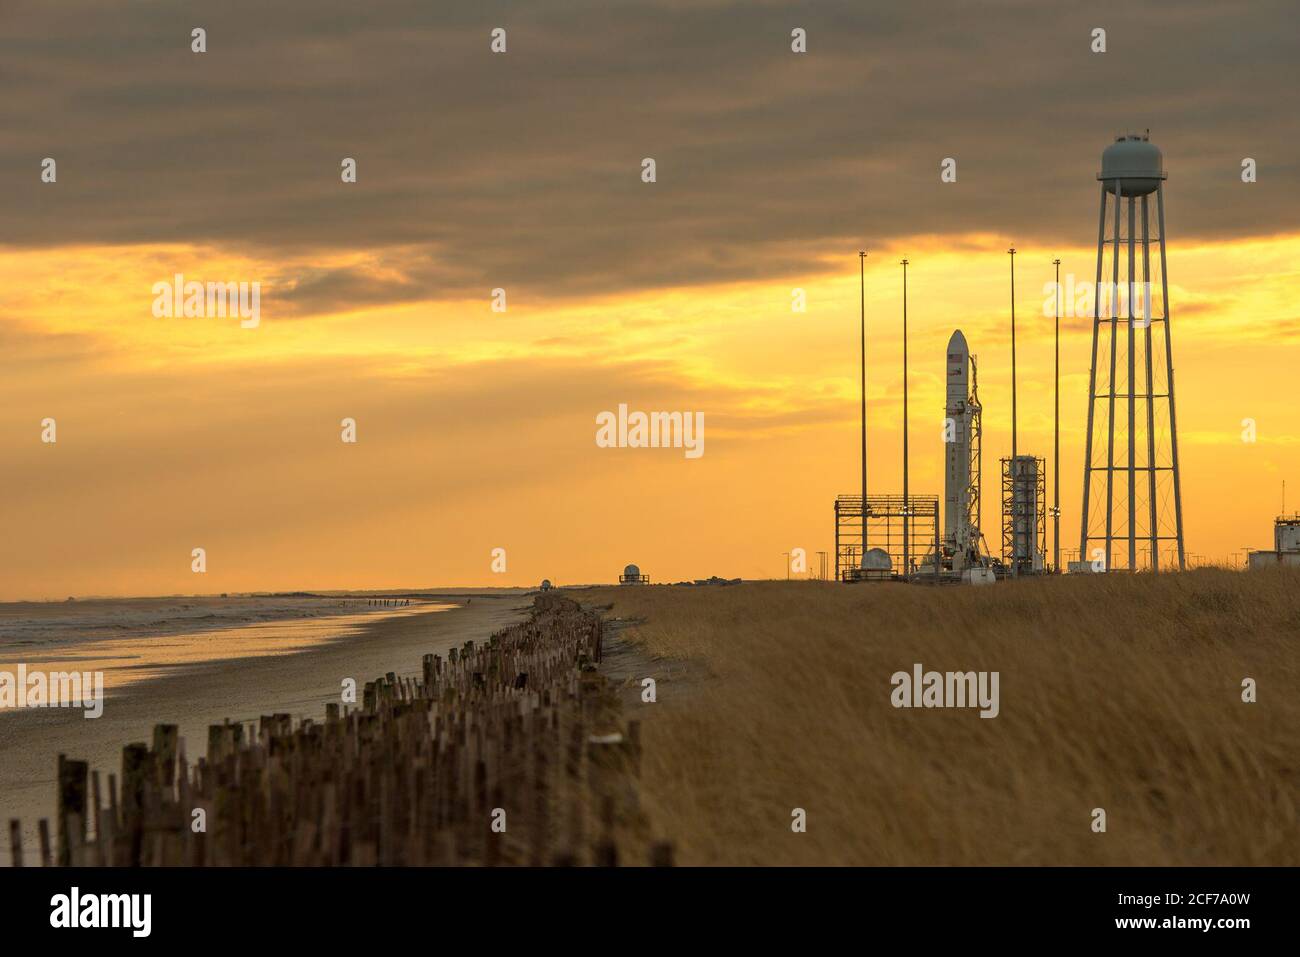 An Orbital Sciences Corporation Antares rocket is seen on launch Pad-0A at NASA's Wallops Flight Facility, Monday, January 6, 2014 in advance of a planned Wednesday, Jan. 8th, 1:32 p.m. EST launch, Wallops Island, VA. The Antares will launch a Cygnus spacecraft on a cargo resupply mission to the International Space Station. The Orbital-1 mission is Orbital Sciences' first contracted cargo delivery flight to the space station for NASA. Among the cargo aboard Cygnus set to launch to the space station are science experiments, crew provisions, spare parts and other hardware.   More info: http://1. Stock Photo